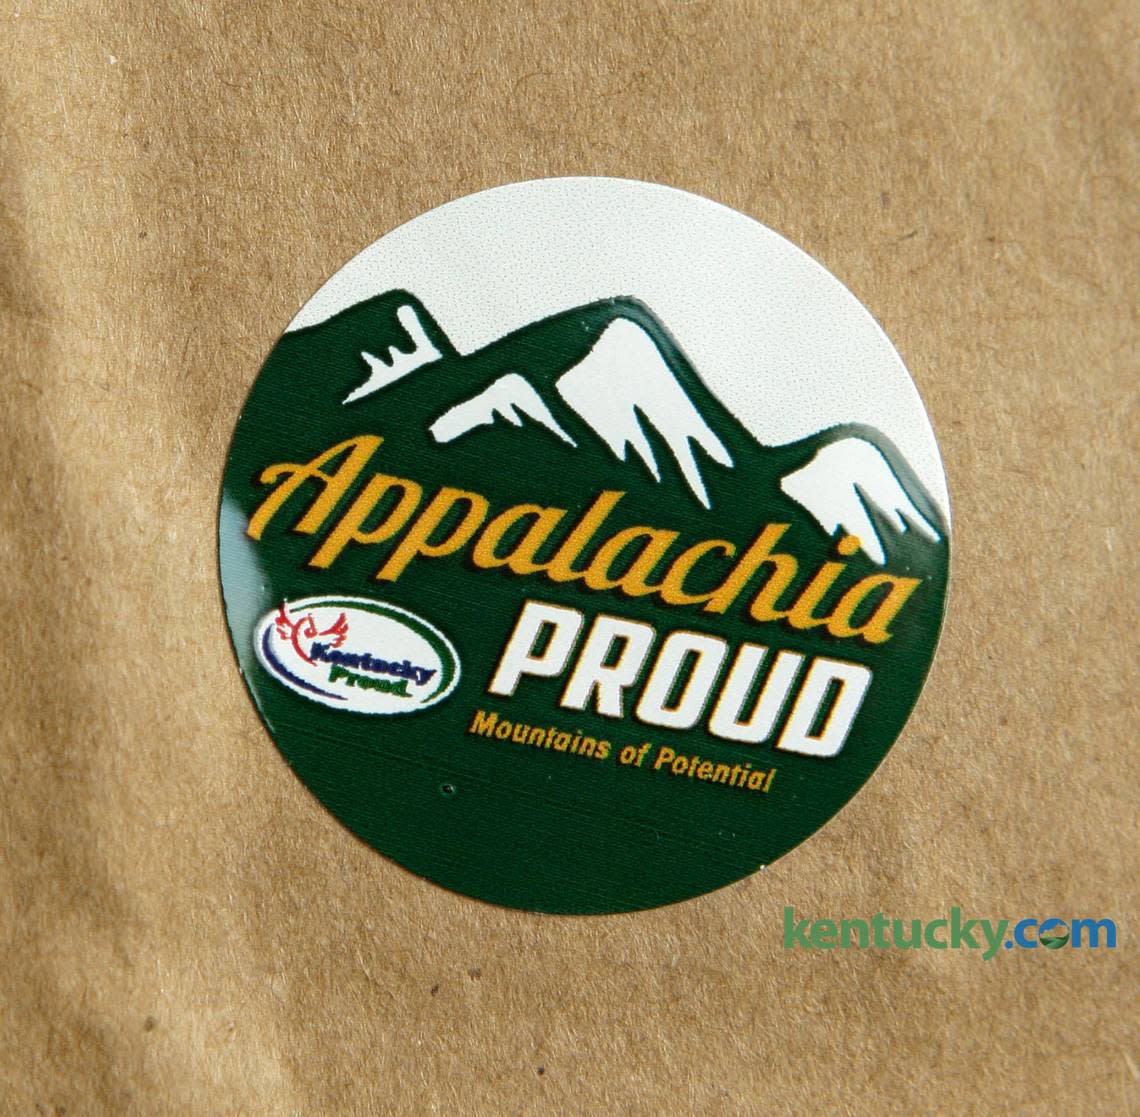 Kentucky Proud products produced in Eastern Kentucky display an Appalachia Proud designation.